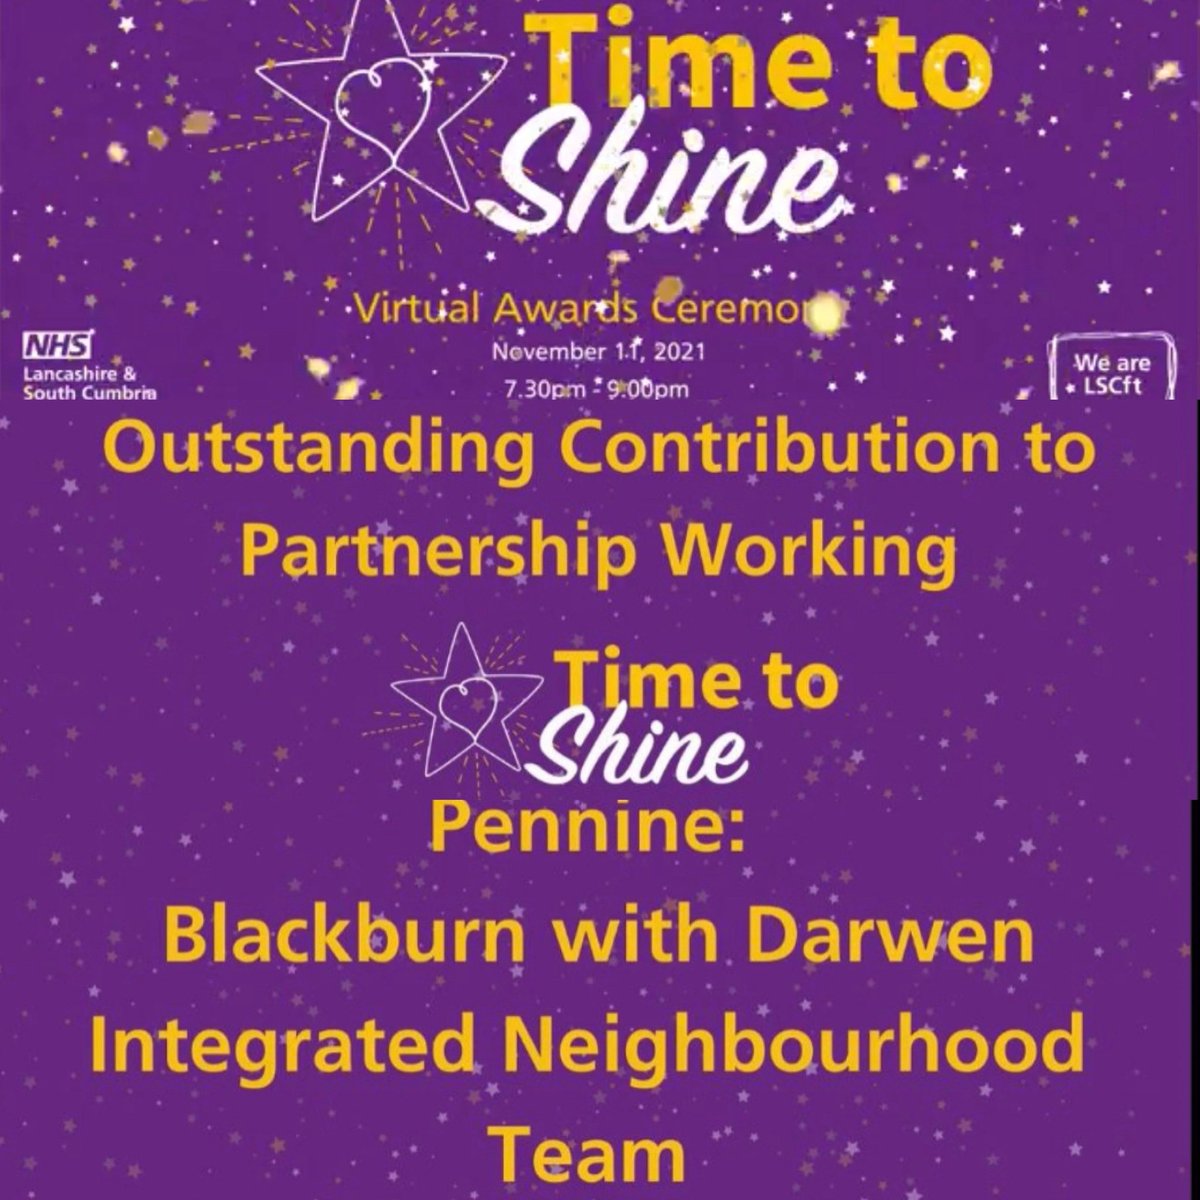 So proud of @WeAreLSCFT BwD integrated neighbourhood team. A true testament to all their hard work & determination to support vulnerable people in Pennine. This is only made possible through partnerships with our fabulous partners #Integratedworking